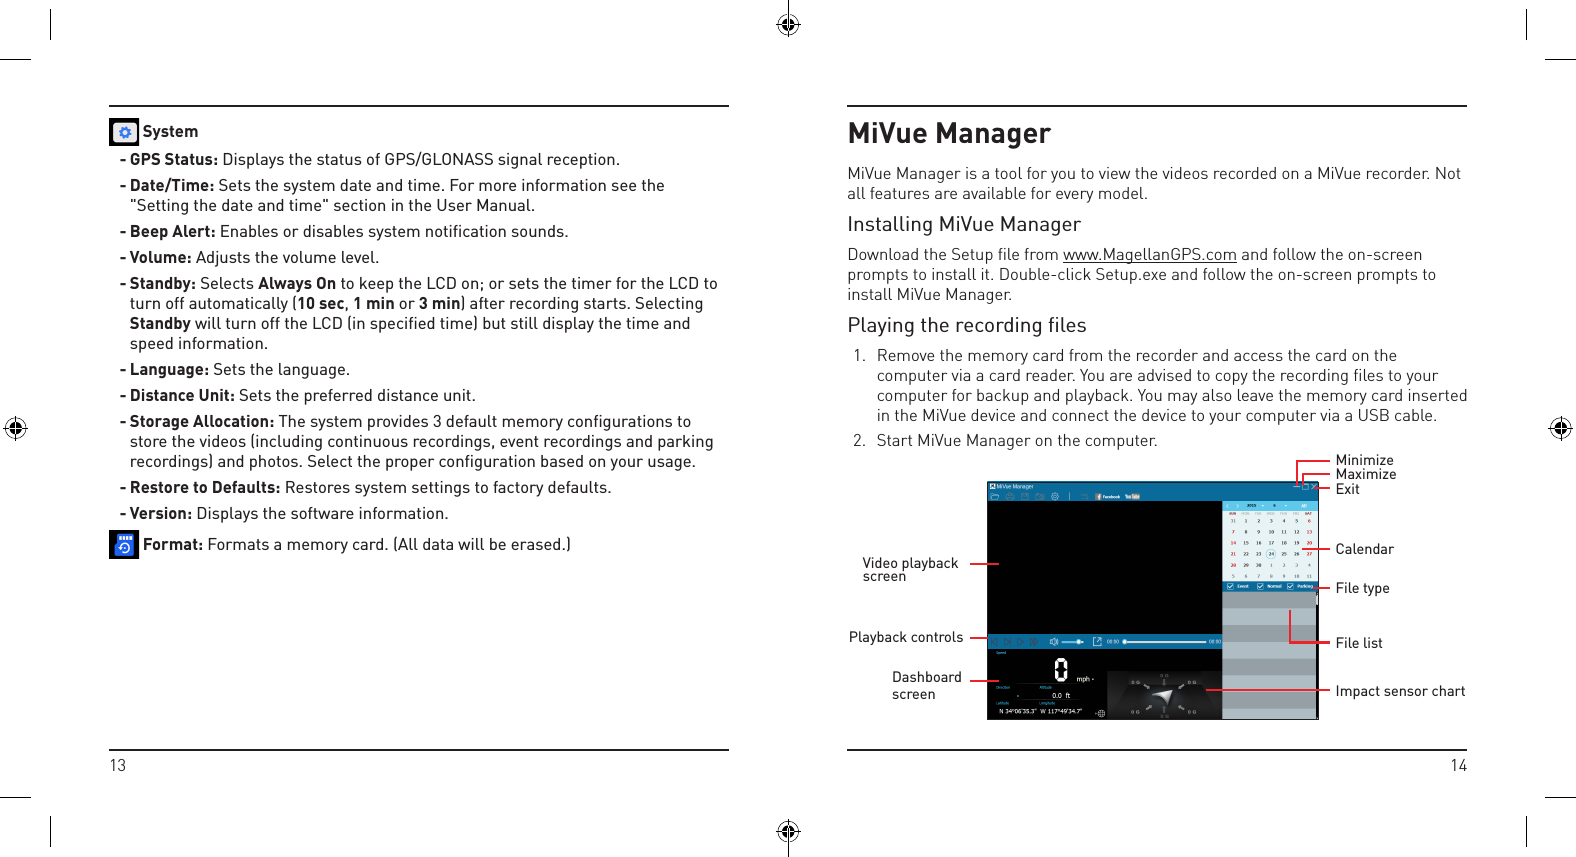 1413MiVue ManagerMiVue Manager is a tool for you to view the videos recorded on a MiVue recorder. Not all features are available for every model.Installing MiVue ManagerDownload the Setup ﬁle from www.MagellanGPS.com and follow the on-screen prompts to install it. Double-click Setup.exe and follow the on-screen prompts to install MiVue Manager.Playing the recording ﬁles1.  Remove the memory card from the recorder and access the card on the computer via a card reader. You are advised to copy the recording ﬁles to your computer for backup and playback. You may also leave the memory card inserted in the MiVue device and connect the device to your computer via a USB cable.2.  Start MiVue Manager on the computer.Impact sensor chartExitMaximizeMinimizeCalendarFile typeFile listVideo playback screenPlayback controlsDashboard screen System- GPS Status: Displays the status of GPS/GLONASS signal reception.- Date/Time: Sets the system date and time. For more information see the &quot;Setting the date and time&quot; section in the User Manual.- Beep Alert: Enables or disables system notification sounds.- Volume: Adjusts the volume level.- Standby: Selects Always On to keep the LCD on; or sets the timer for the LCD to turn off automatically (10 sec, 1 min or 3 min) after recording starts. Selecting Standby will turn off the LCD (in specified time) but still display the time and speed information.- Language: Sets the language.- Distance Unit: Sets the preferred distance unit.- Storage Allocation: The system provides 3 default memory configurations to store the videos (including continuous recordings, event recordings and parking recordings) and photos. Select the proper configuration based on your usage.- Restore to Defaults: Restores system settings to factory defaults.- Version: Displays the software information. Format: Formats a memory card. (All data will be erased.)